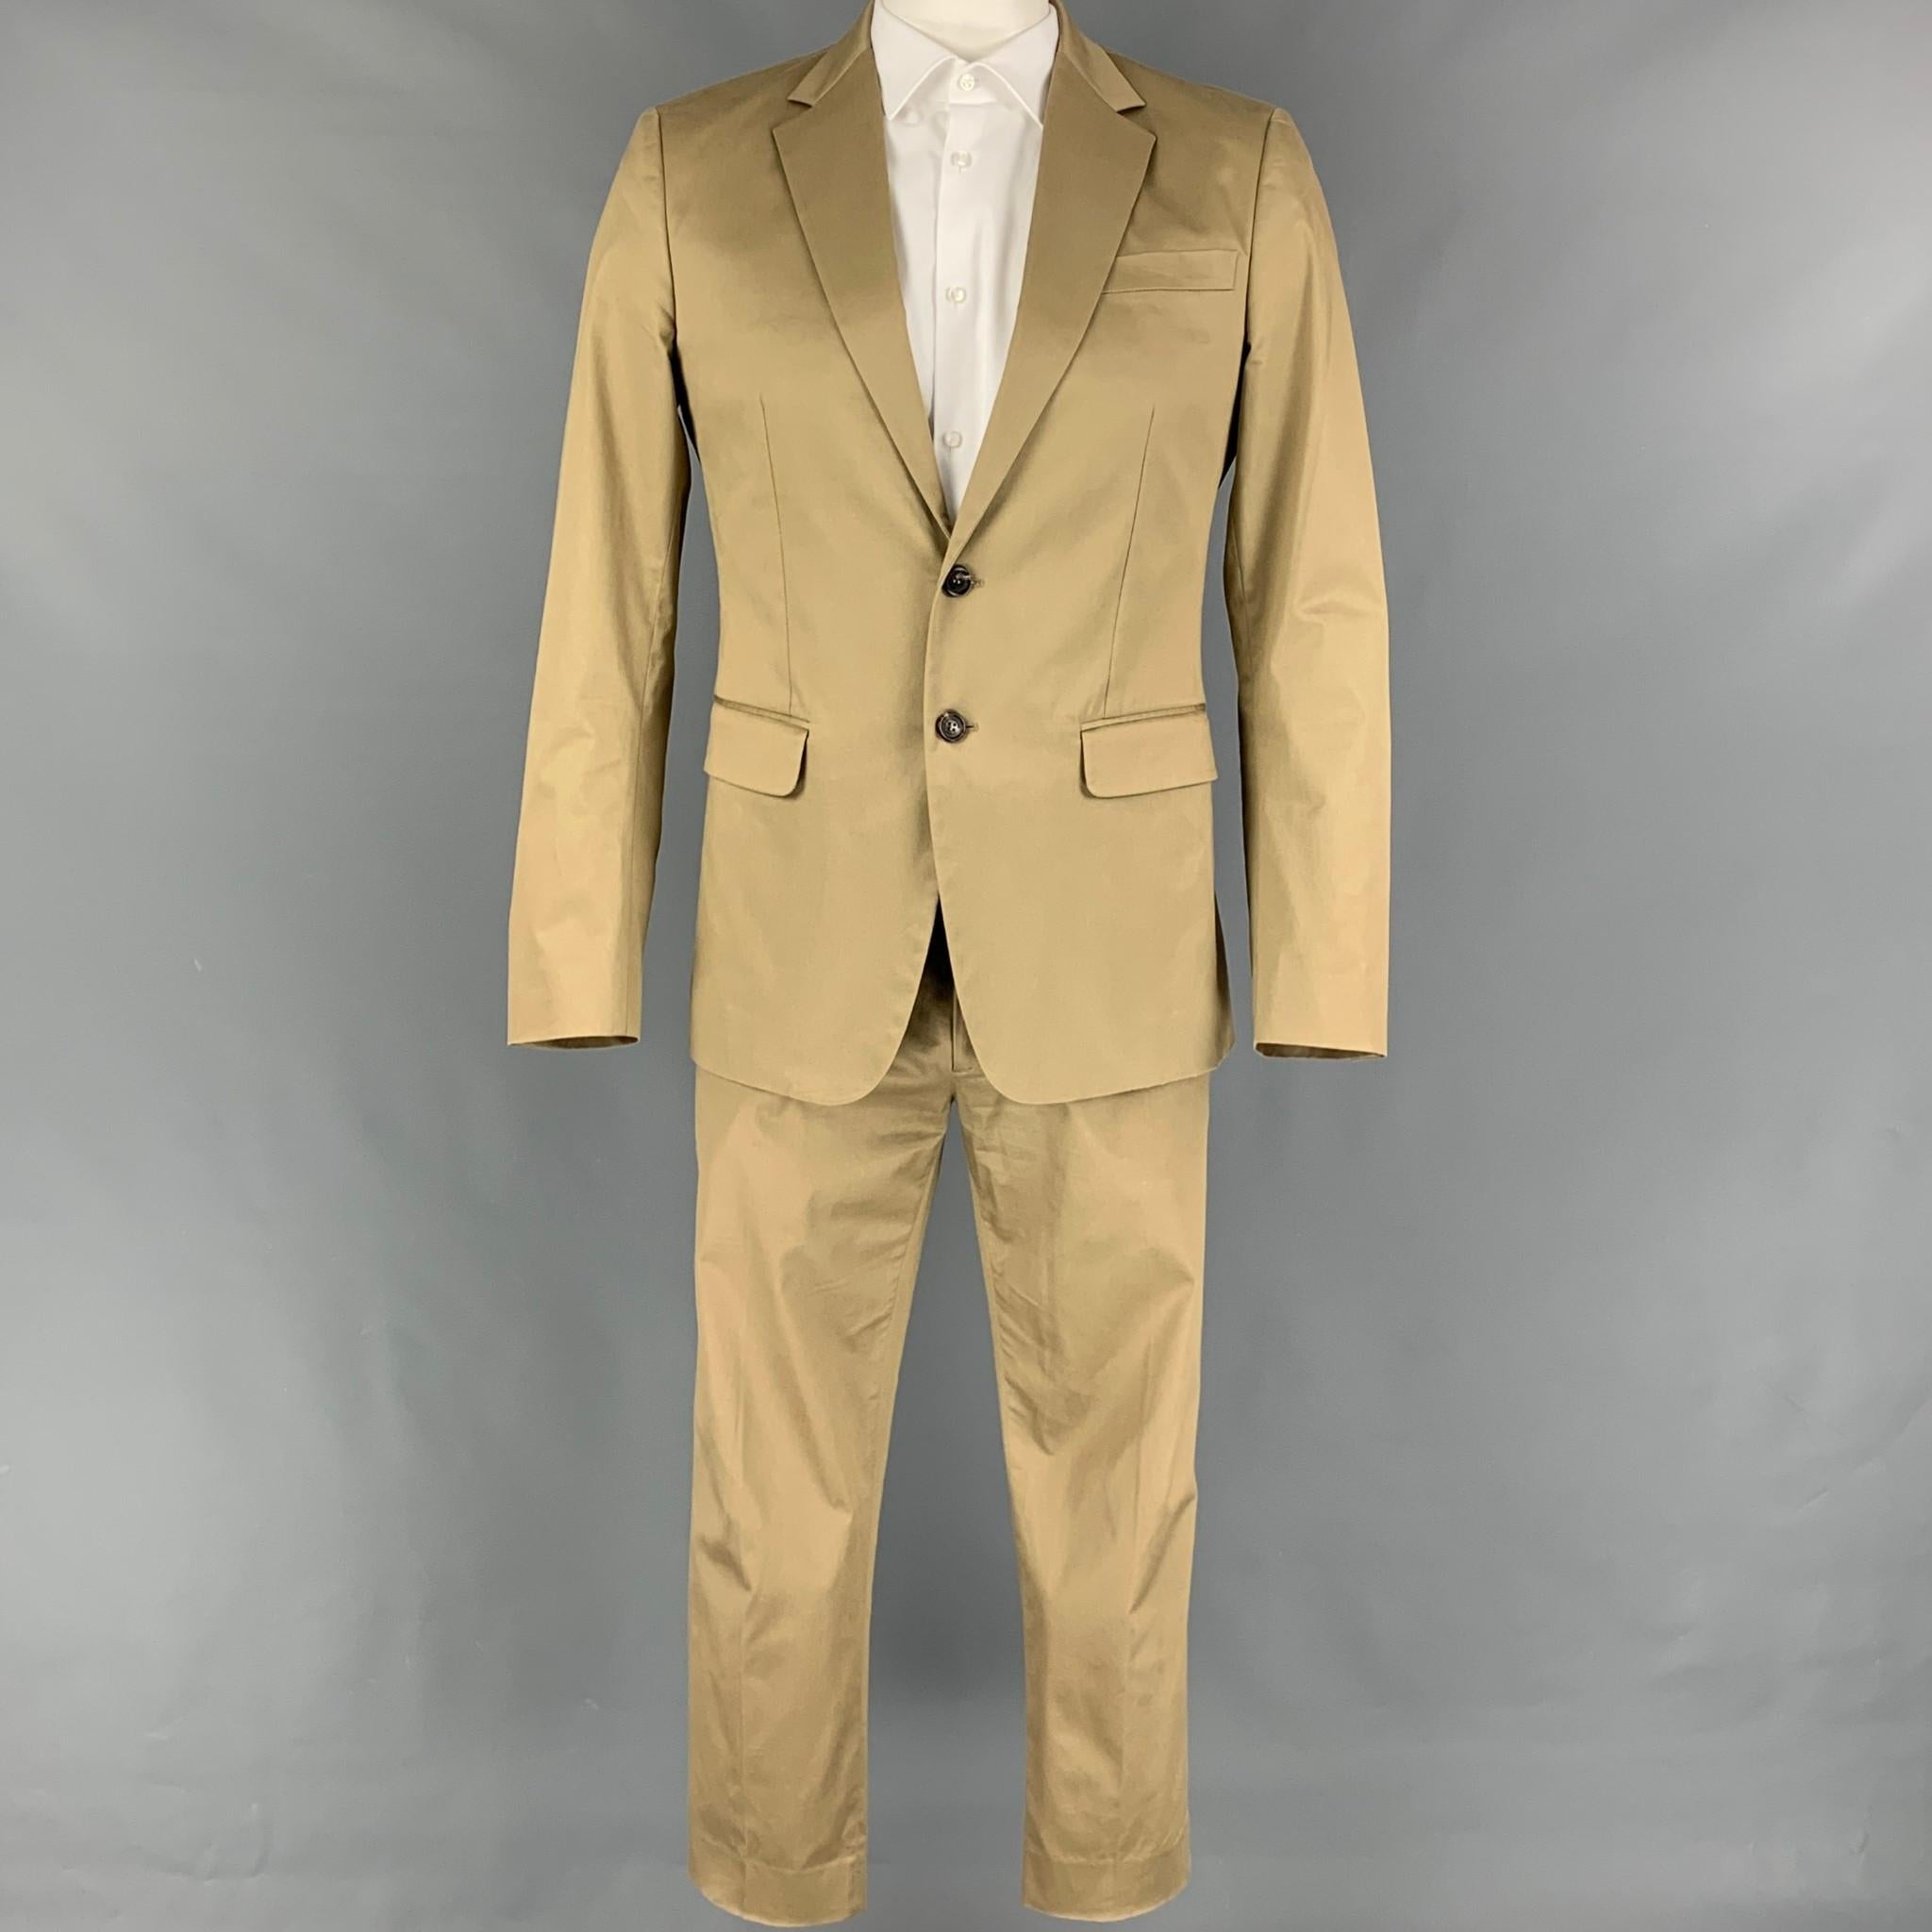 DSQUARED2 'Manchester' suit comes in a khaki cotton with a full liner and includes a single breasted, two button sport coat with a notch lapel and matching flat front trousers. Made in Italy.

Very Good Pre-Owned Condition. Light marks at pants back